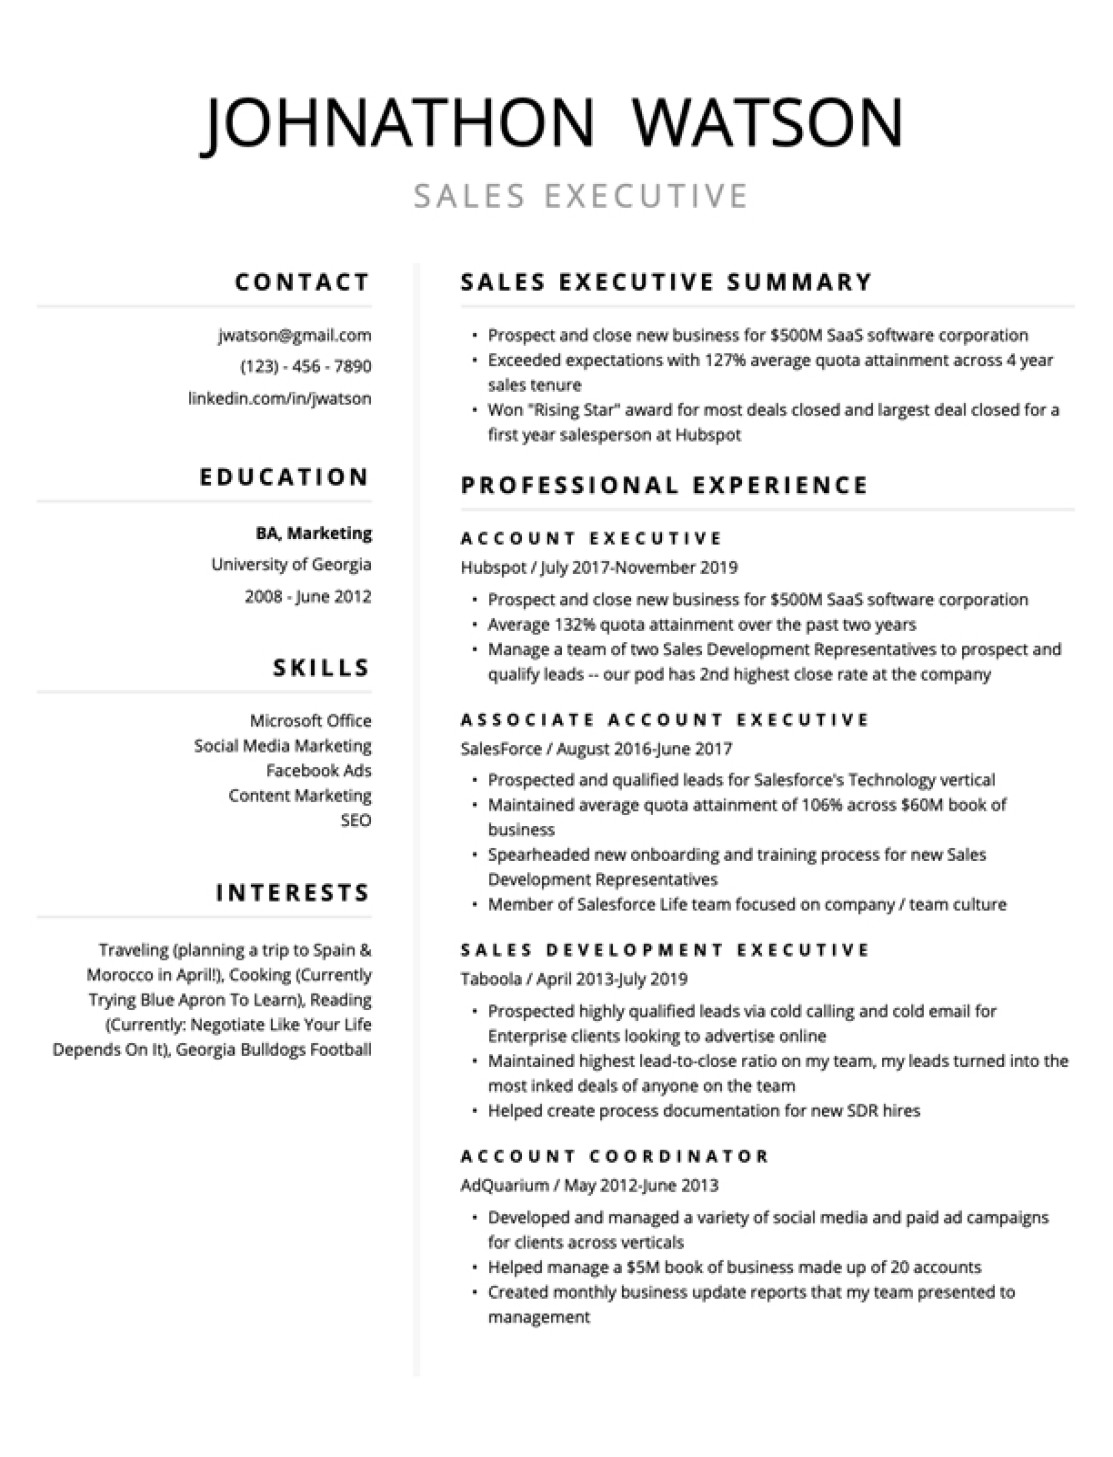 free resume templates for edit amp download resybuild io 3